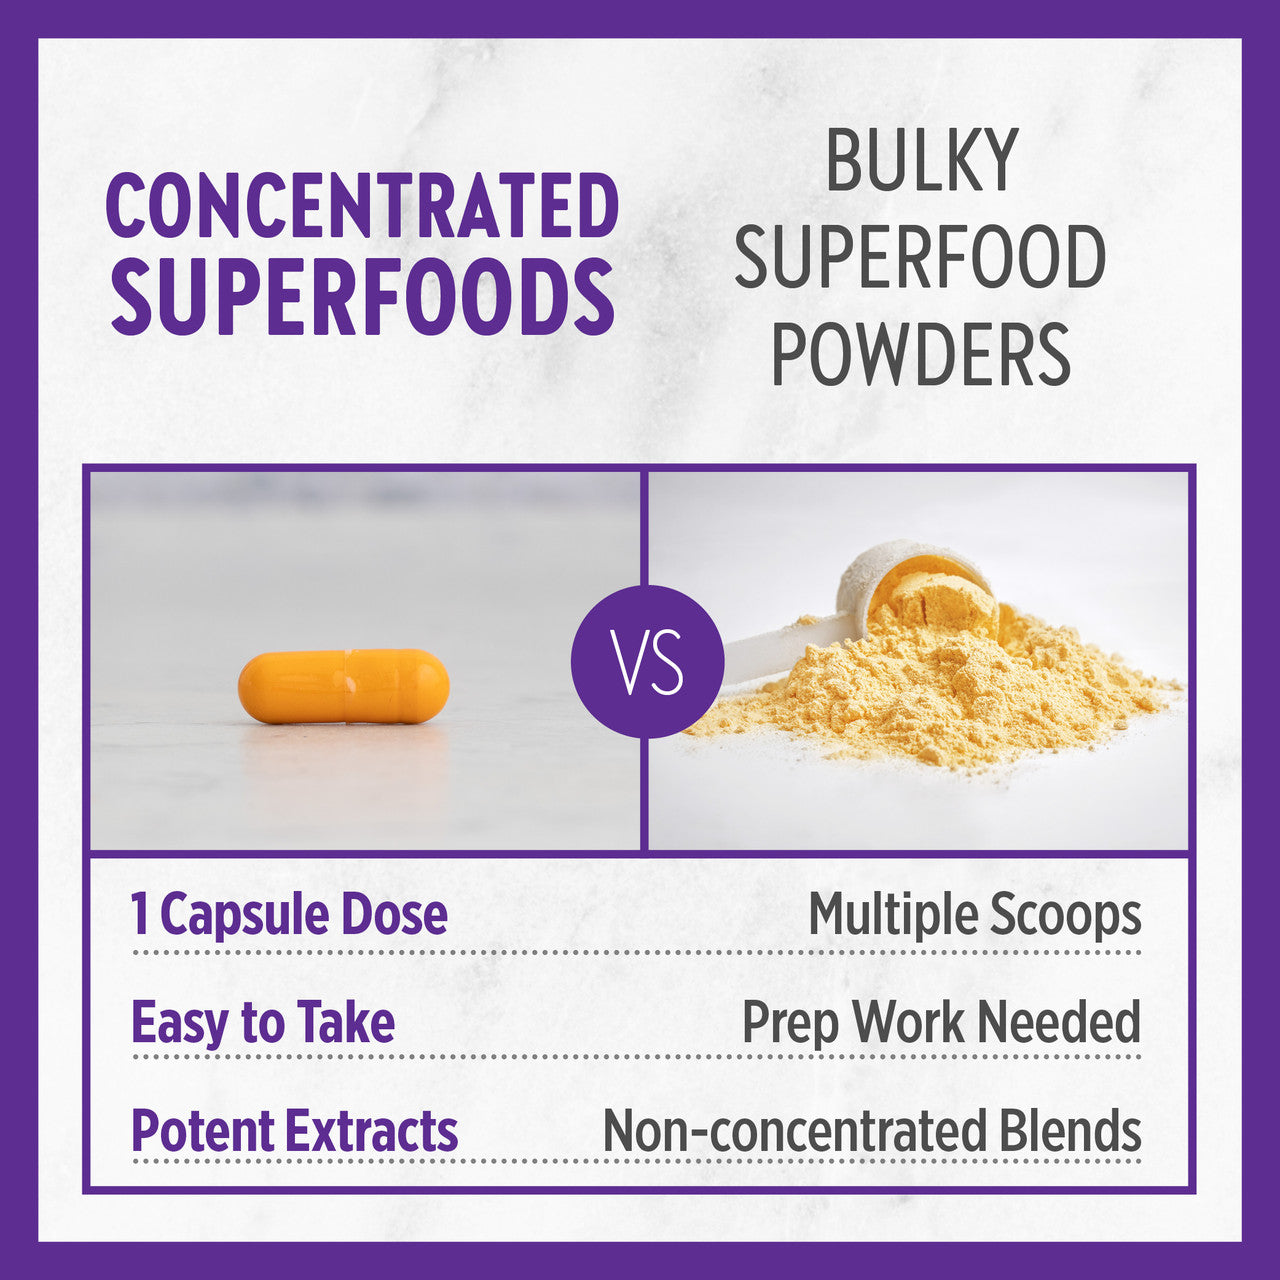 Concentrated Superfood  Turmeric